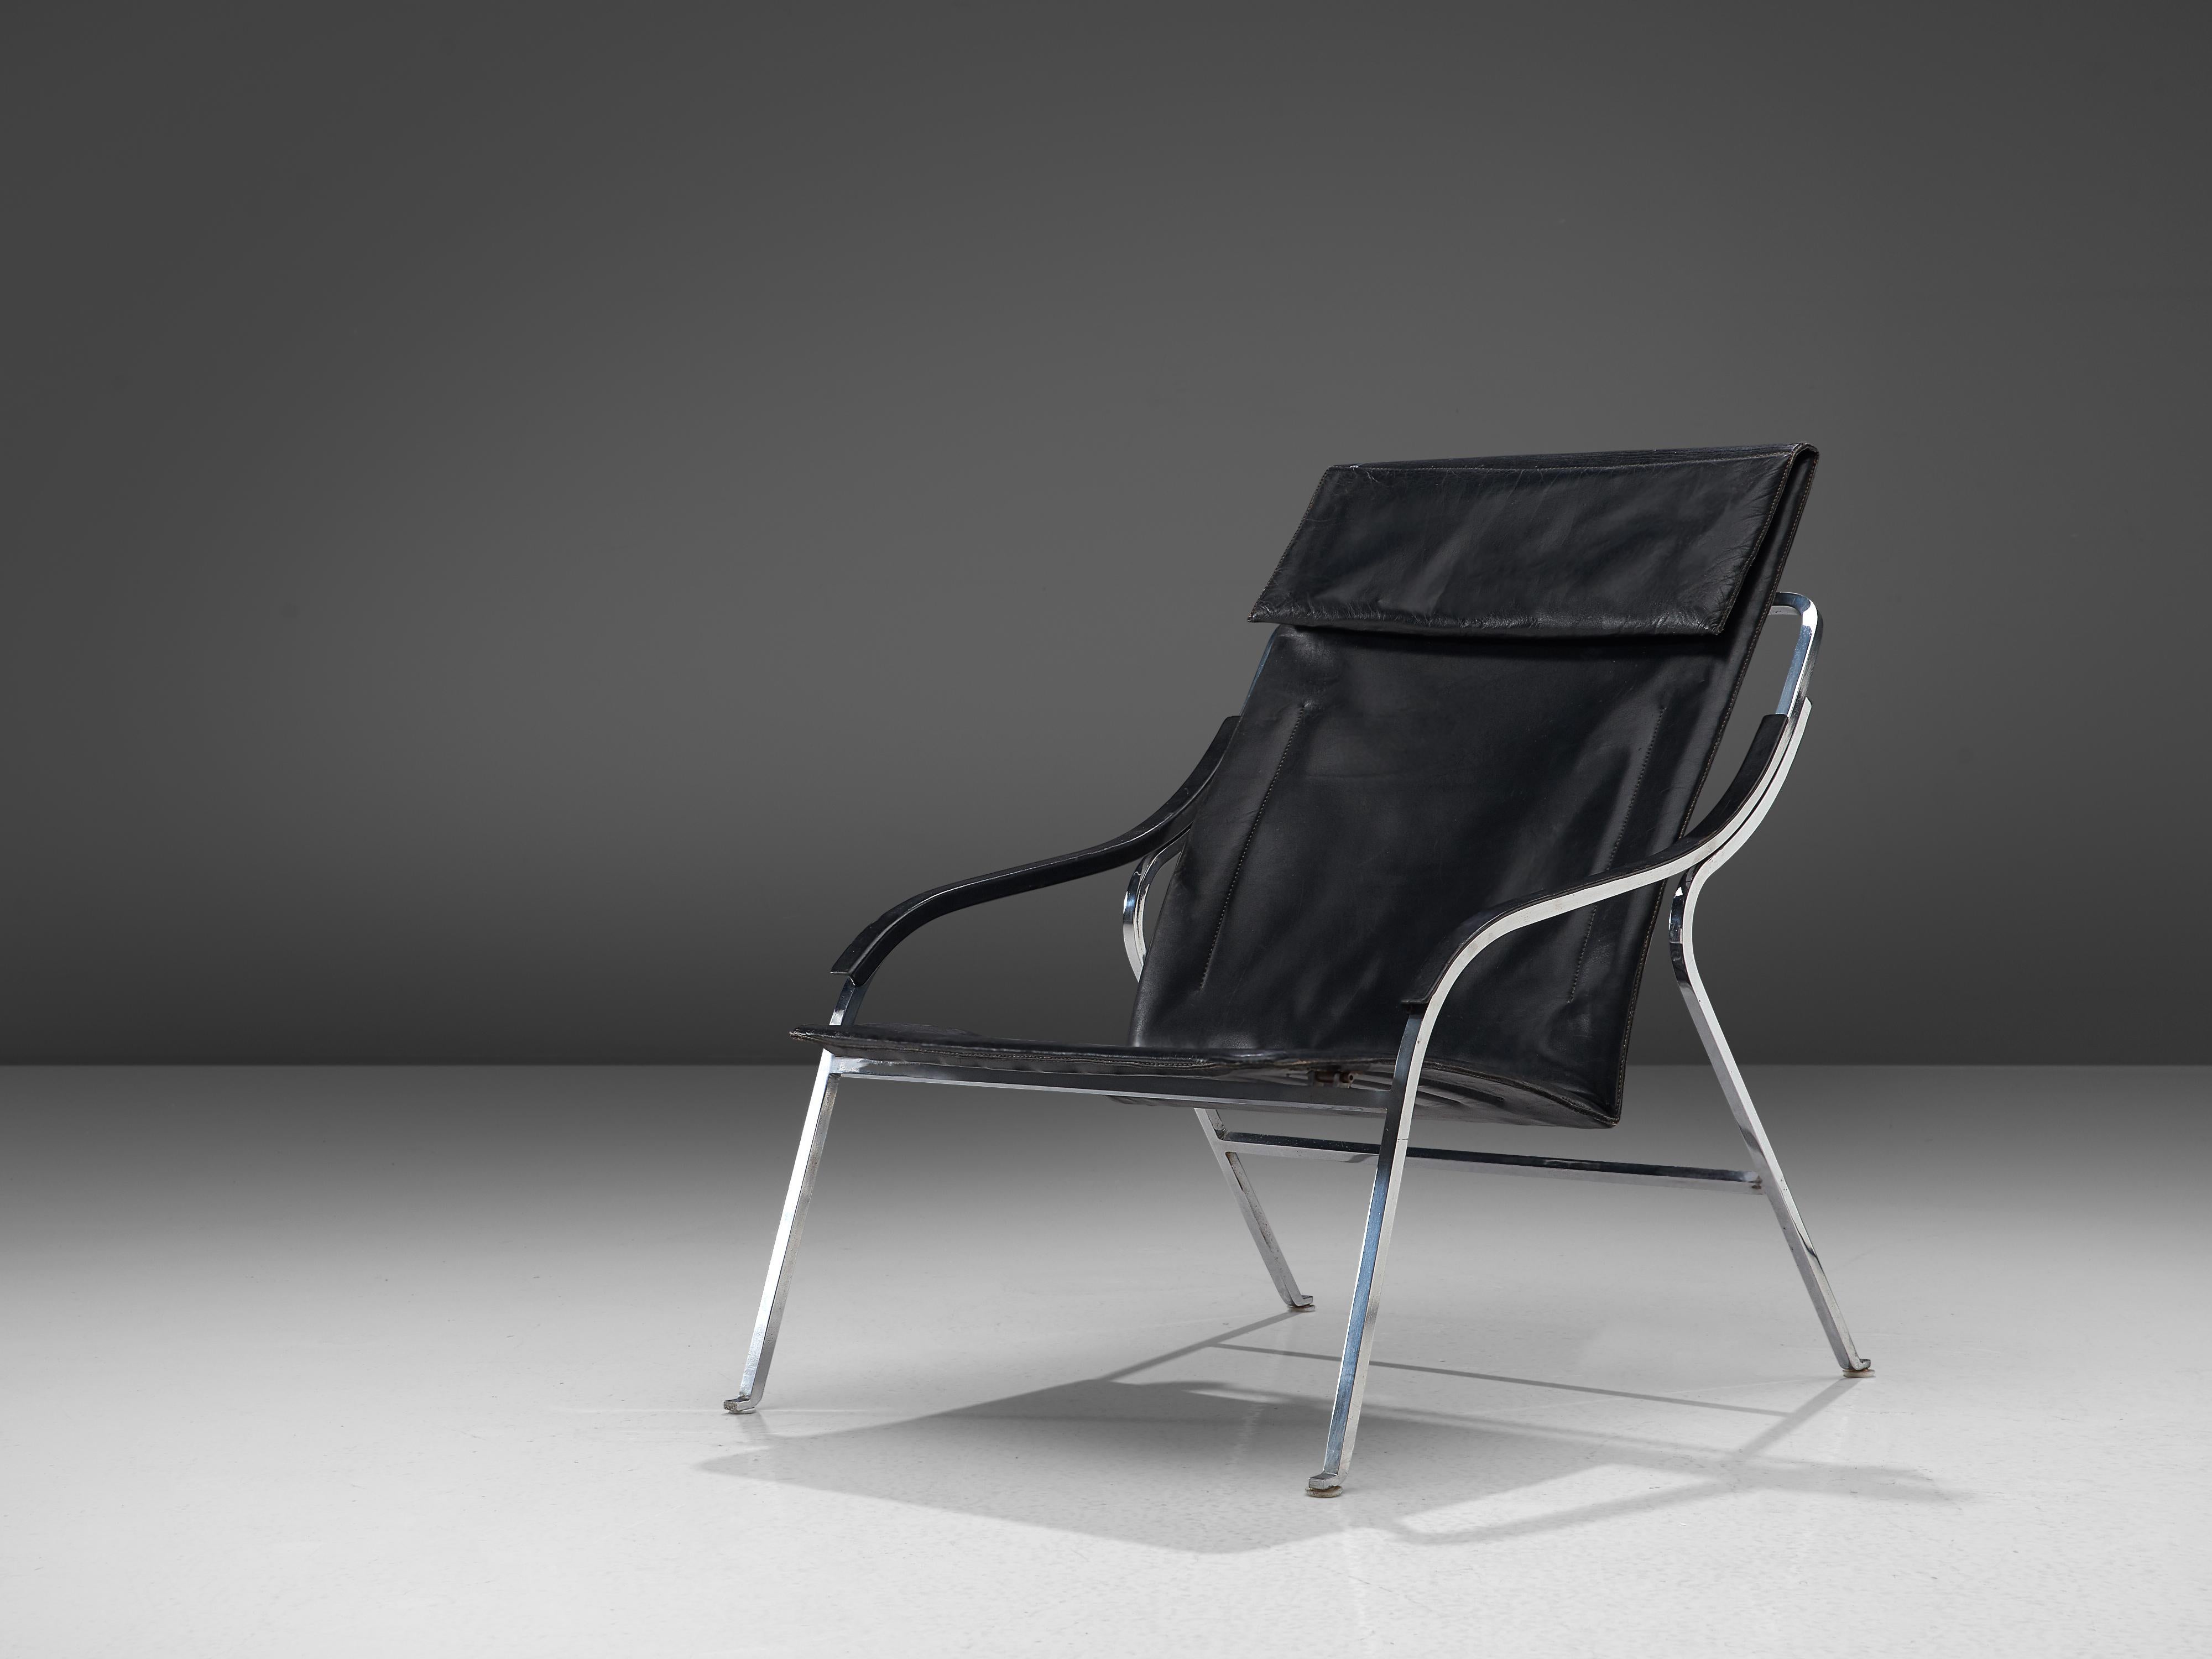 Marco Zanuso for Arflex, lounge chair, black leather, steel, Italy, 1964

This lounge chair by Zanuso remains among the best examples of armchairs designed by the architect. It is not only the ingenious slender design that distinguishes it, but also